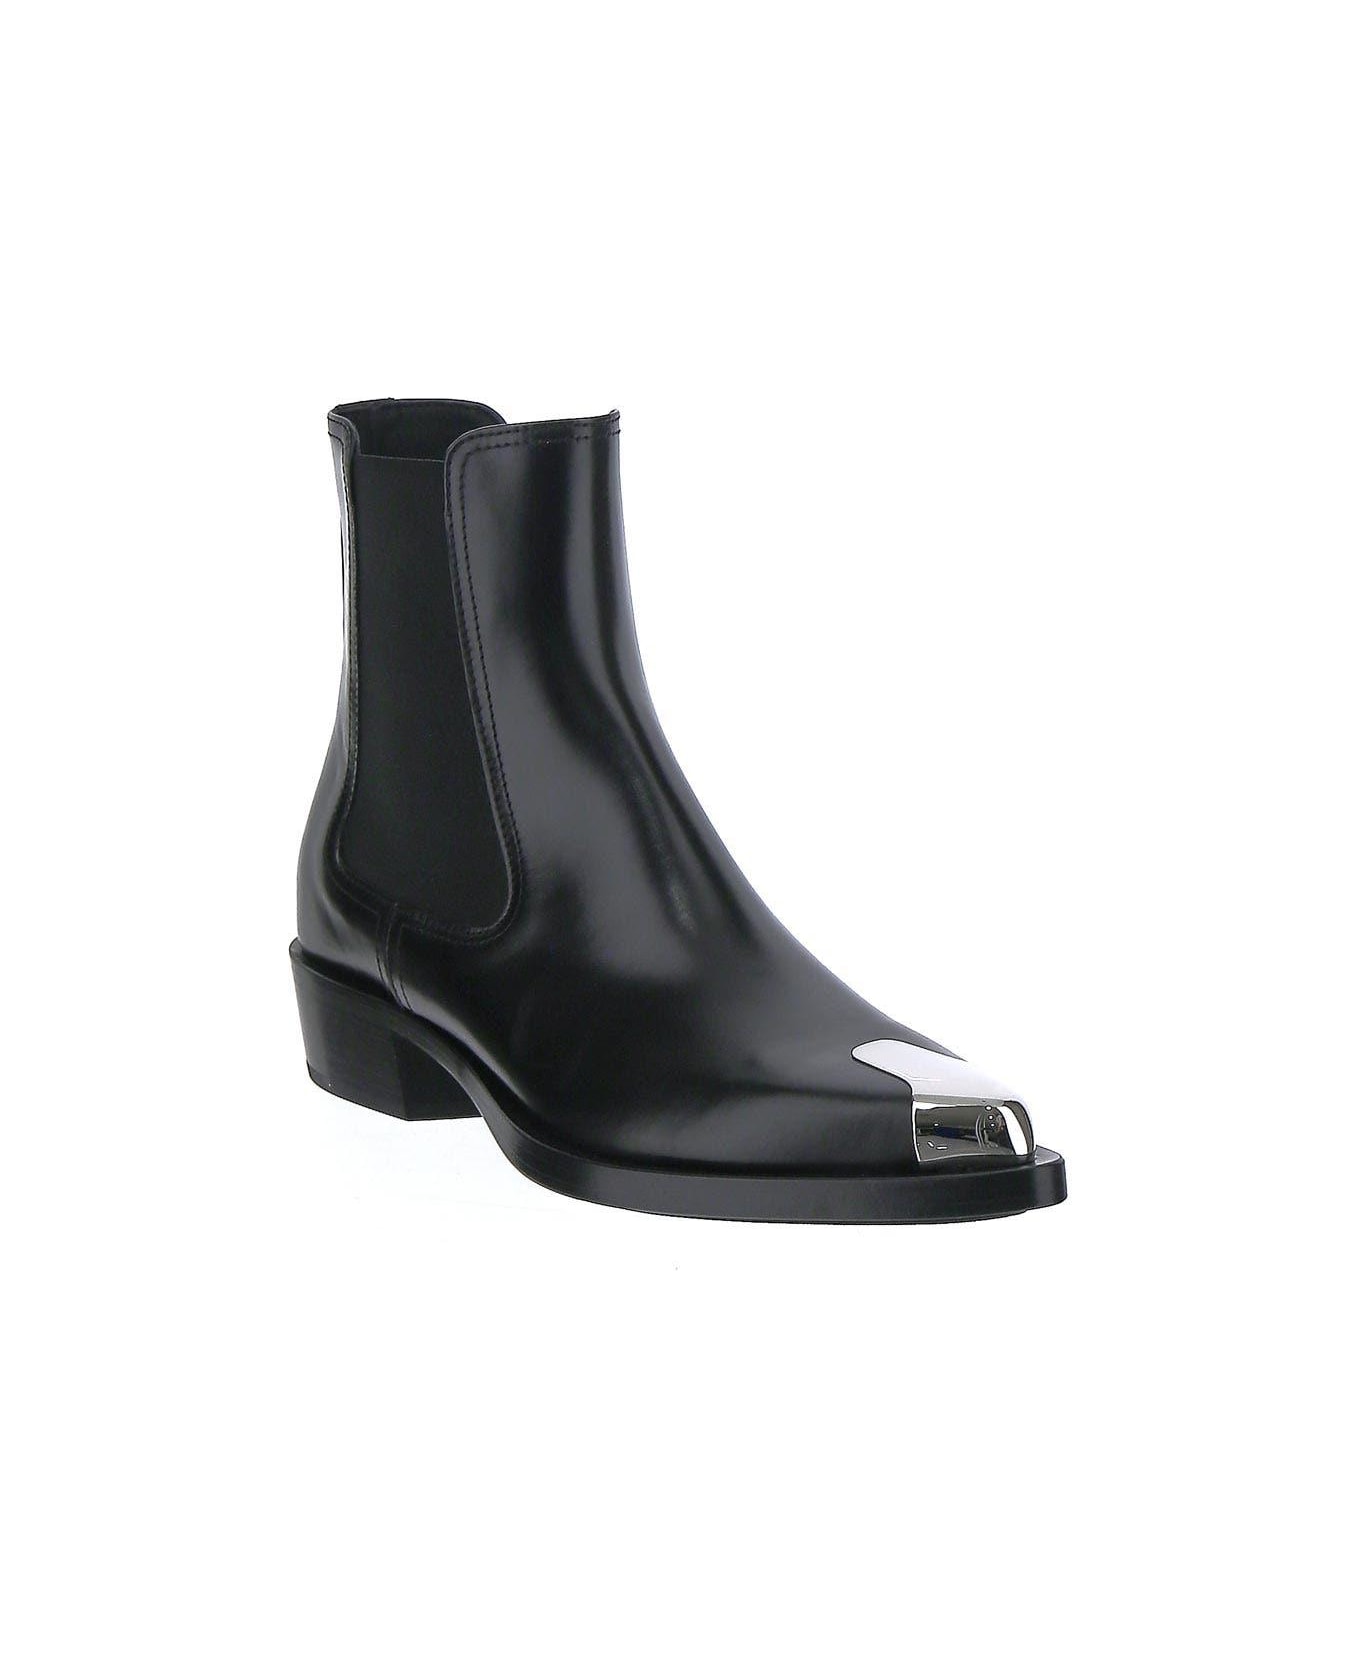 Alexander McQueen Leather Ankle Boots - Black ブーツ